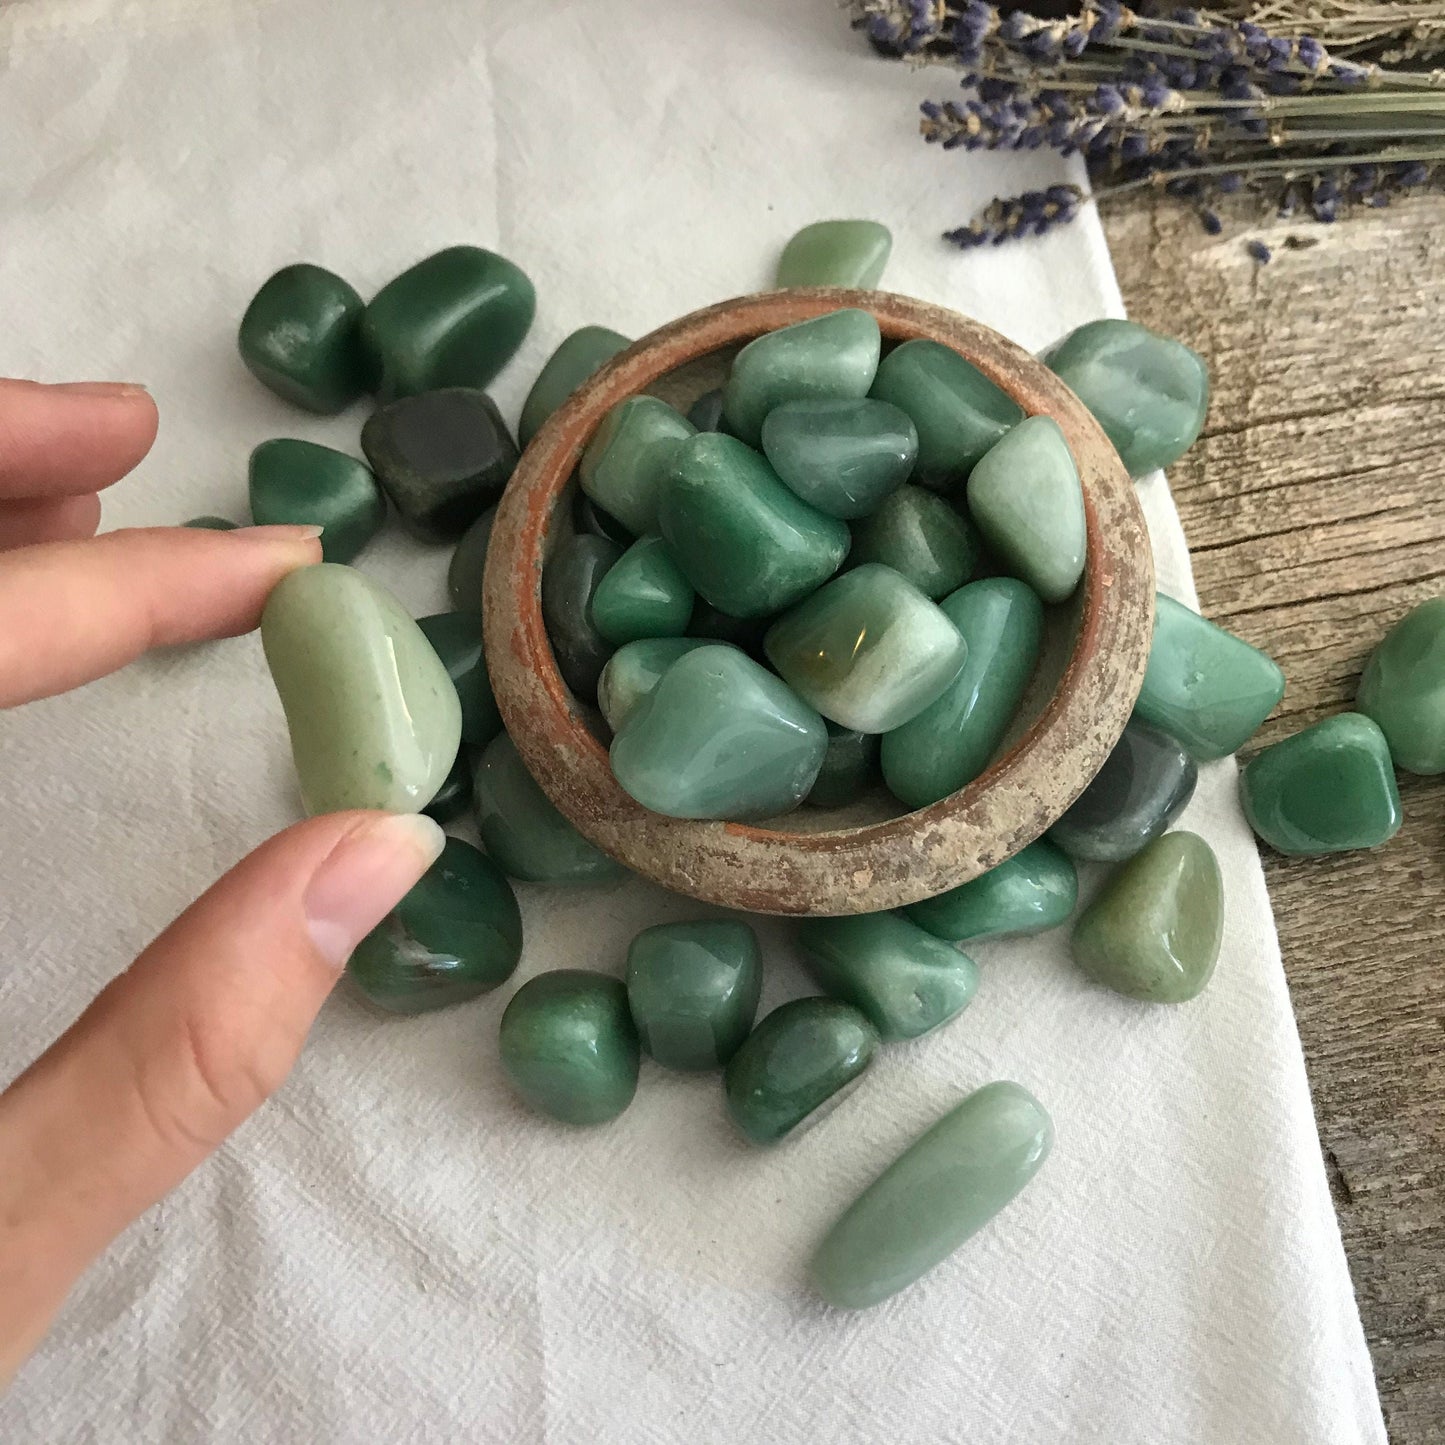 Polished Green Aventurine, Tumbled Stone (Approx. 3/4" - 1 1/4" long) for Wire Wrapping or Crystal Grid Supply 1448